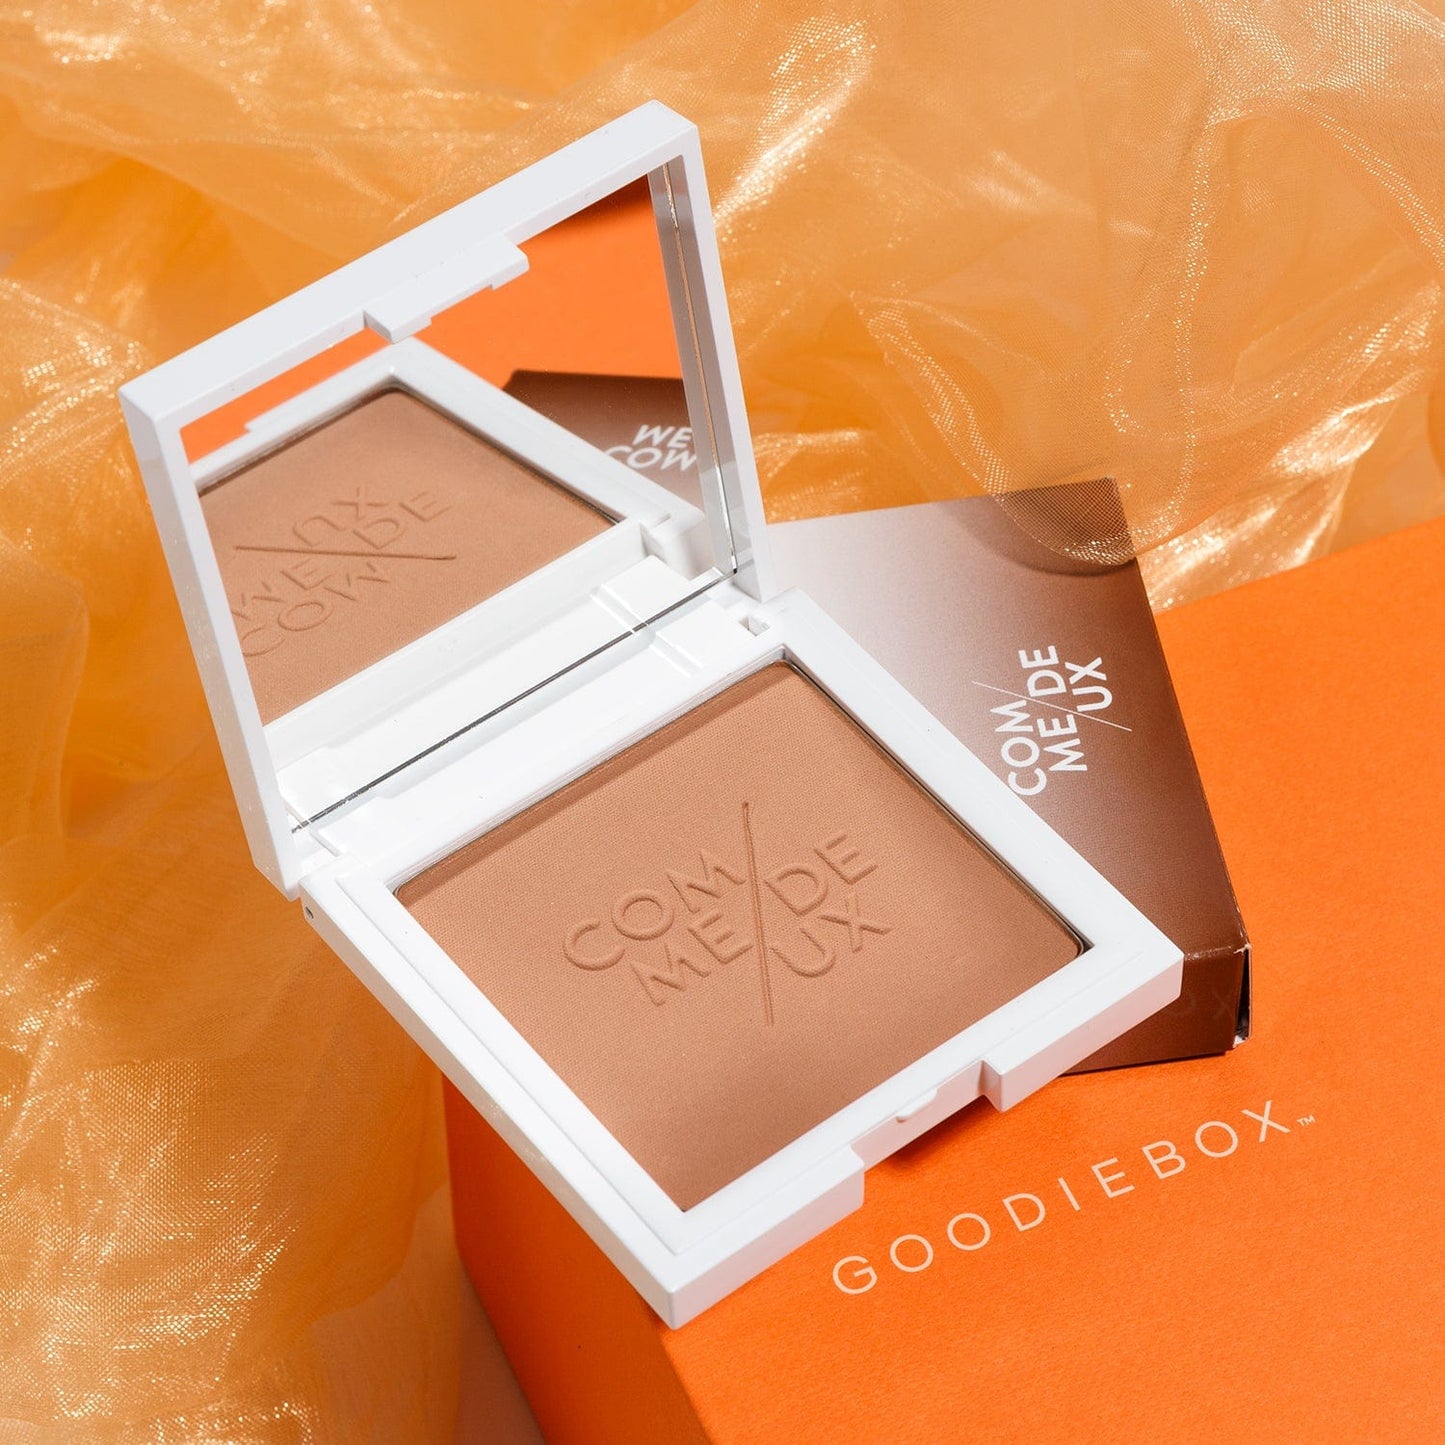 The 'Glow Up' Box